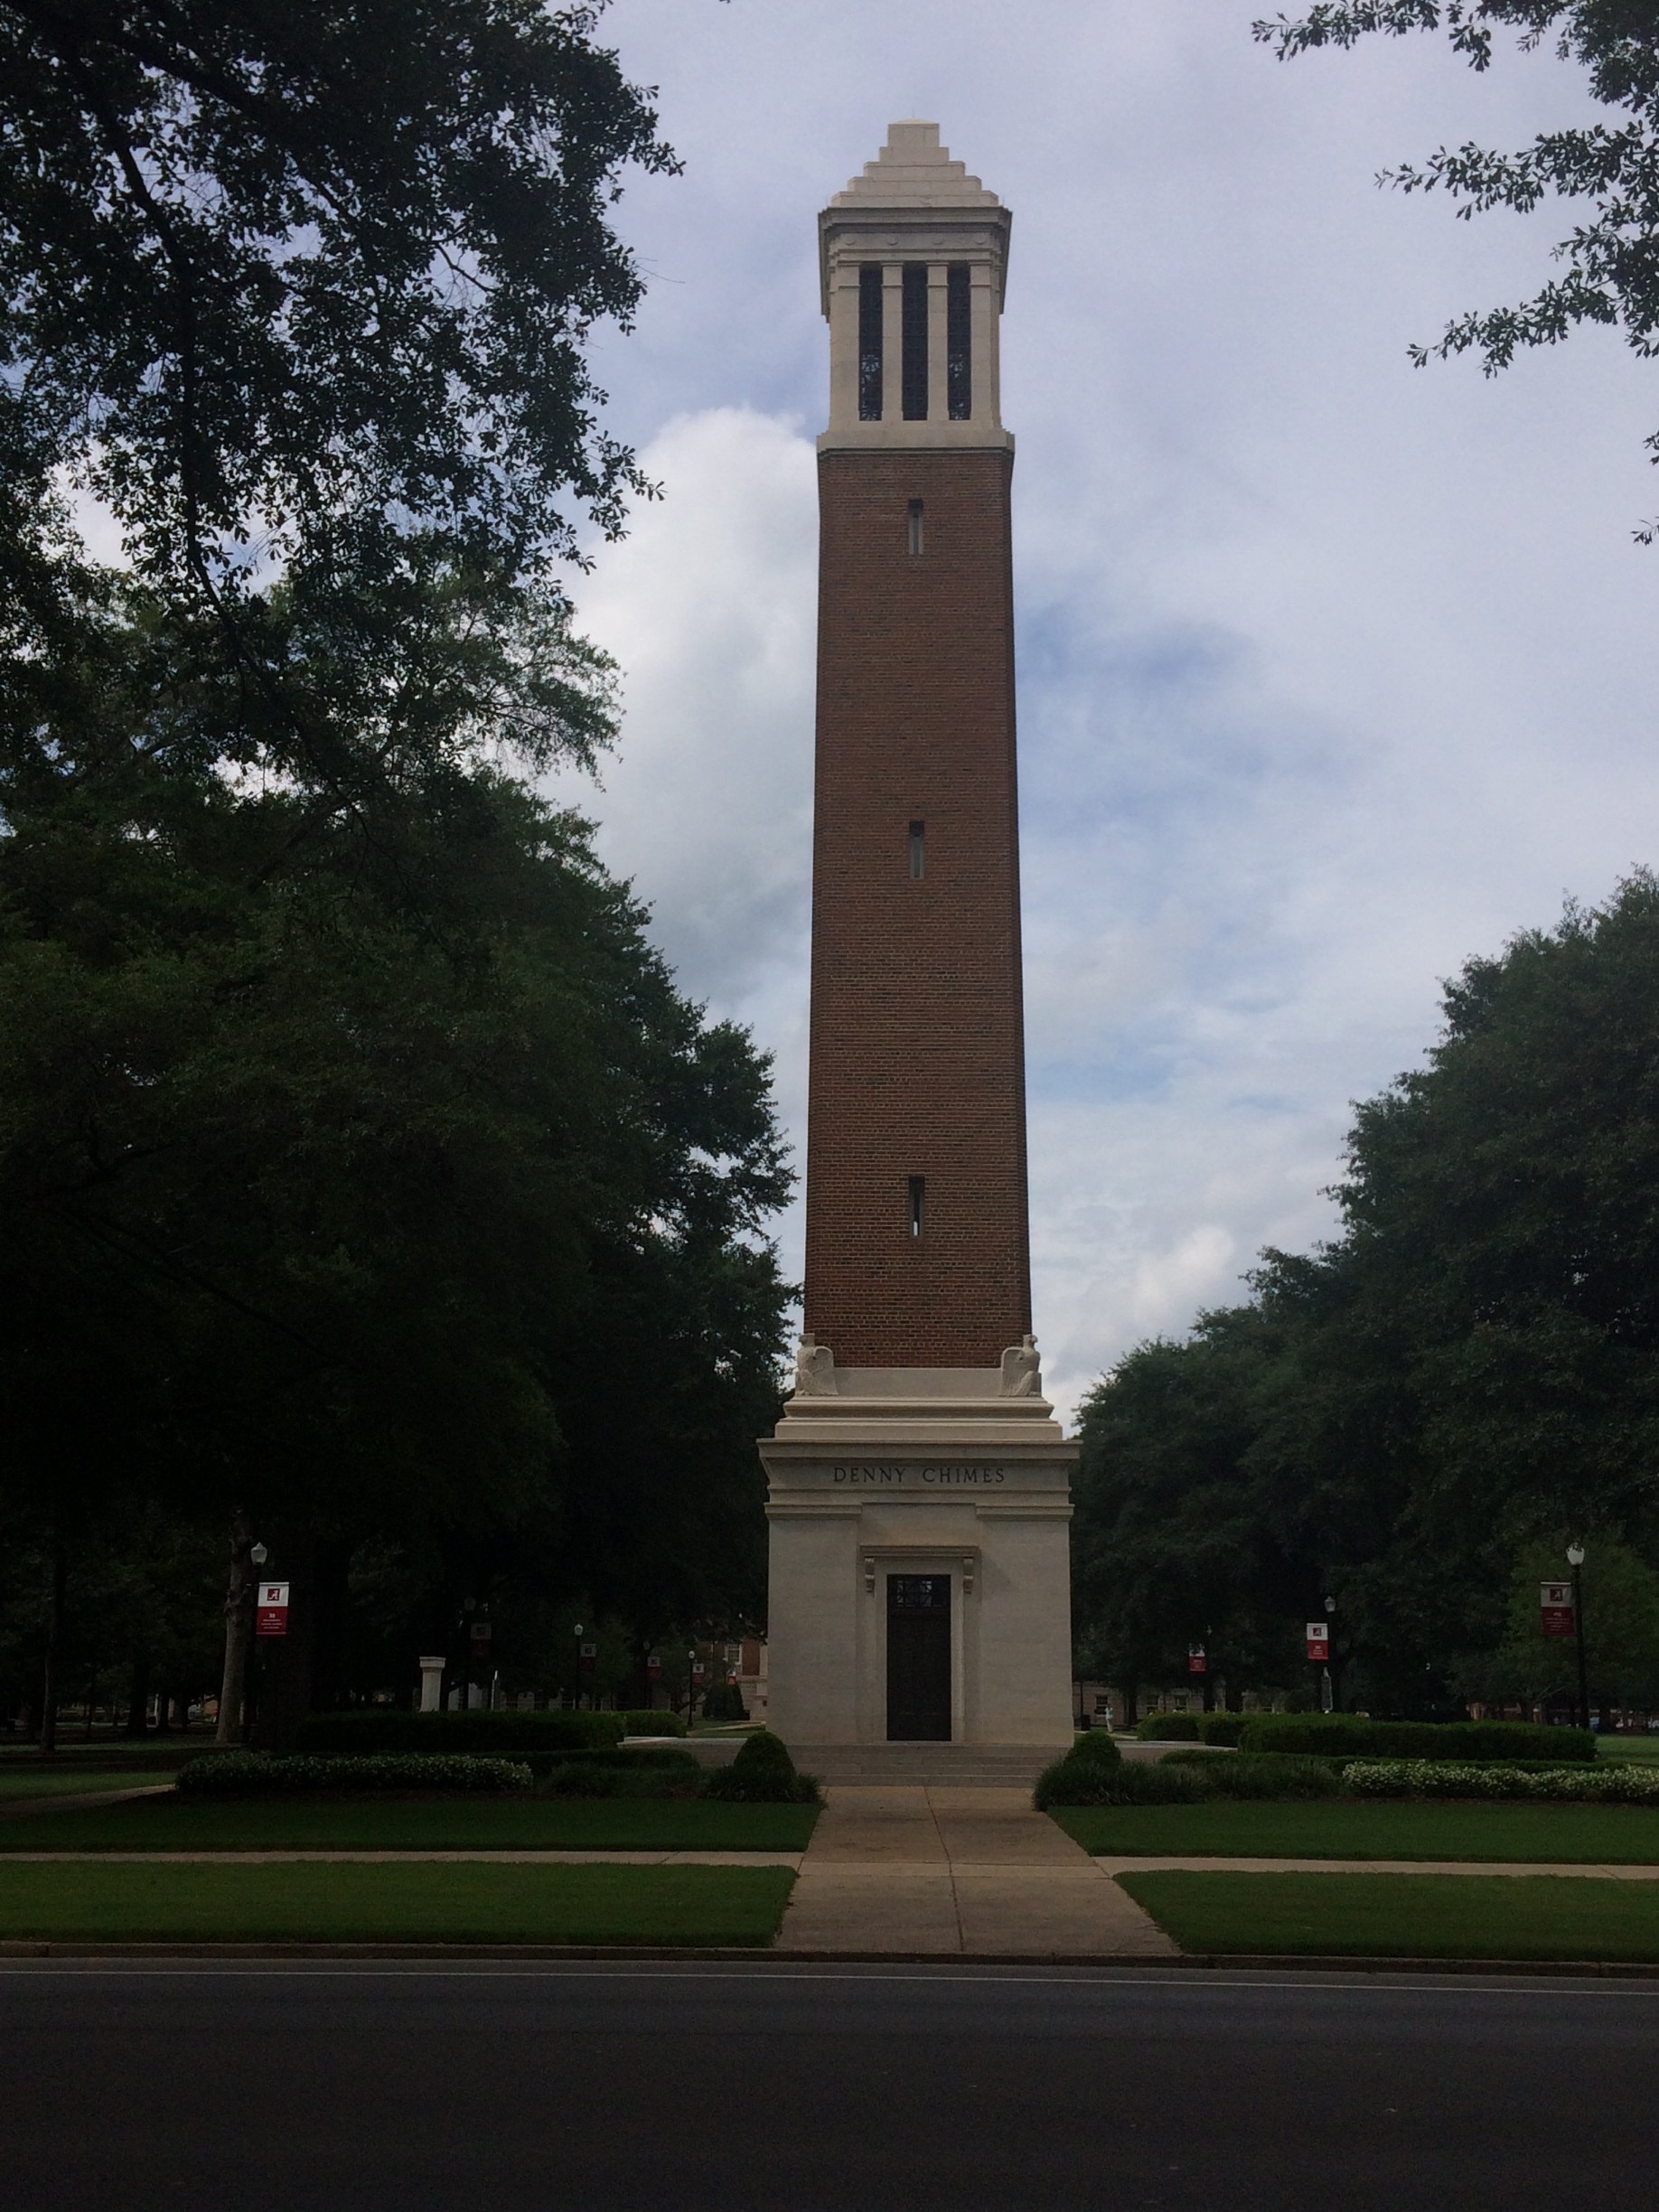 Denny Chimes, Bell Tower